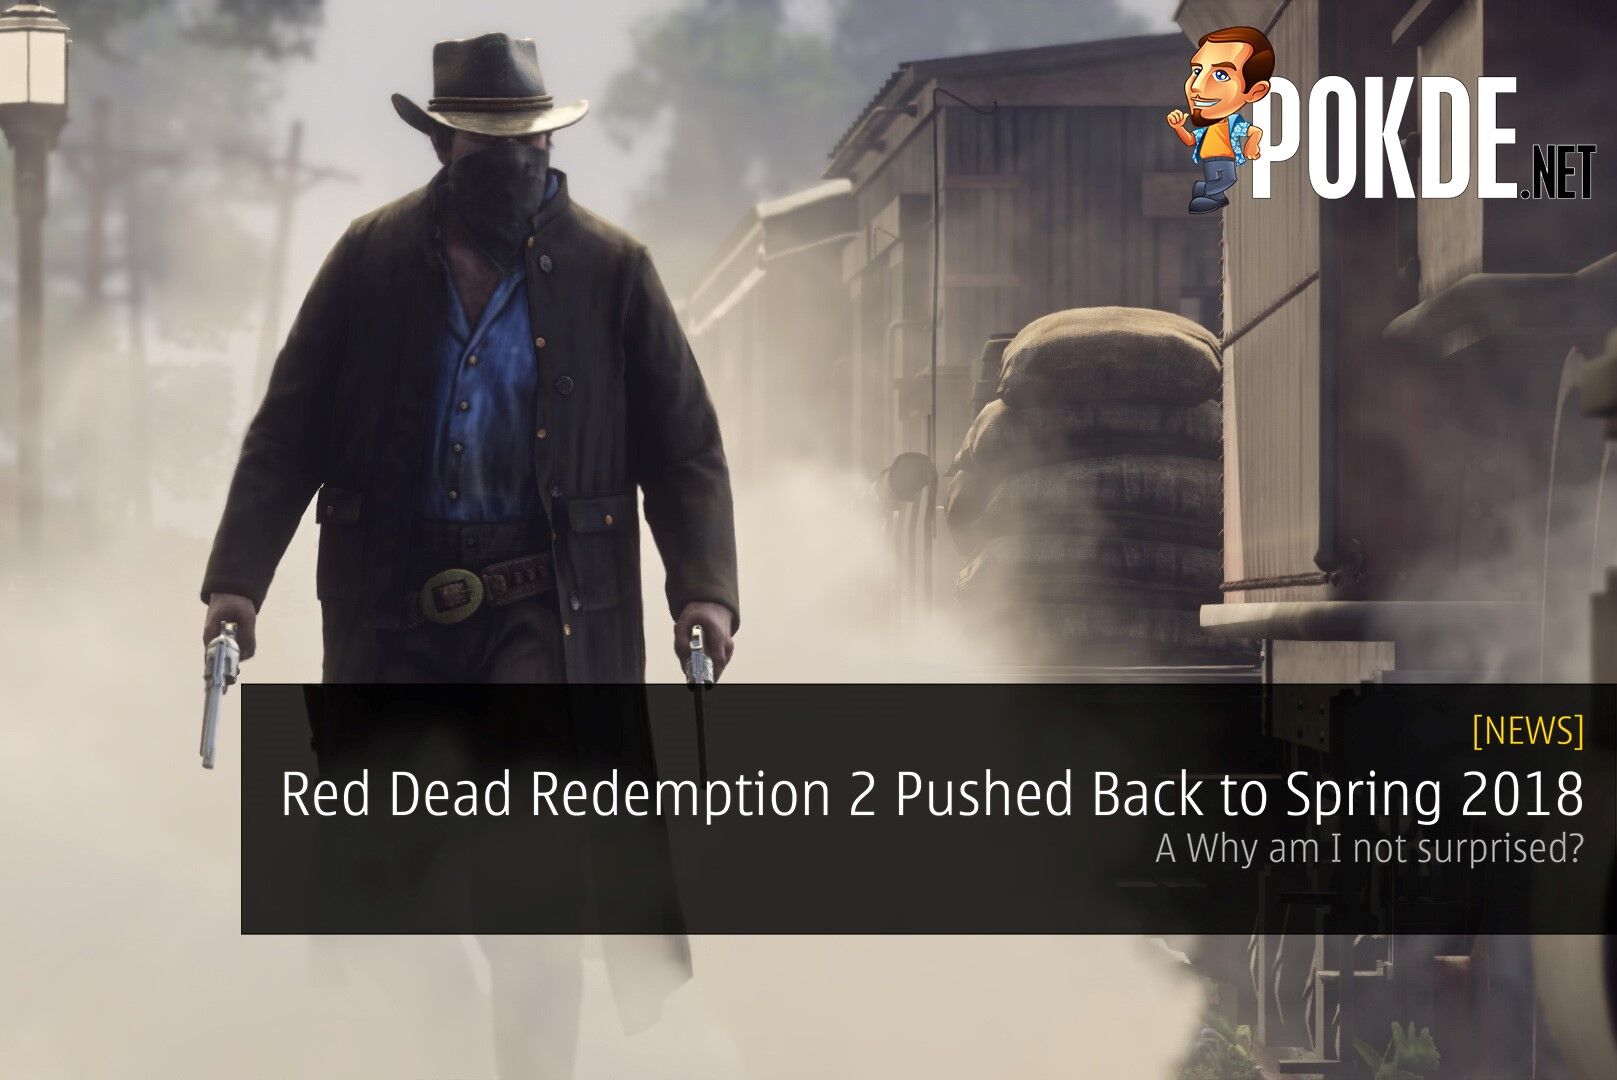 does anyone know how to fix this? it happened after i downloaded an update  for rdr2 on epic games : r/rockstar